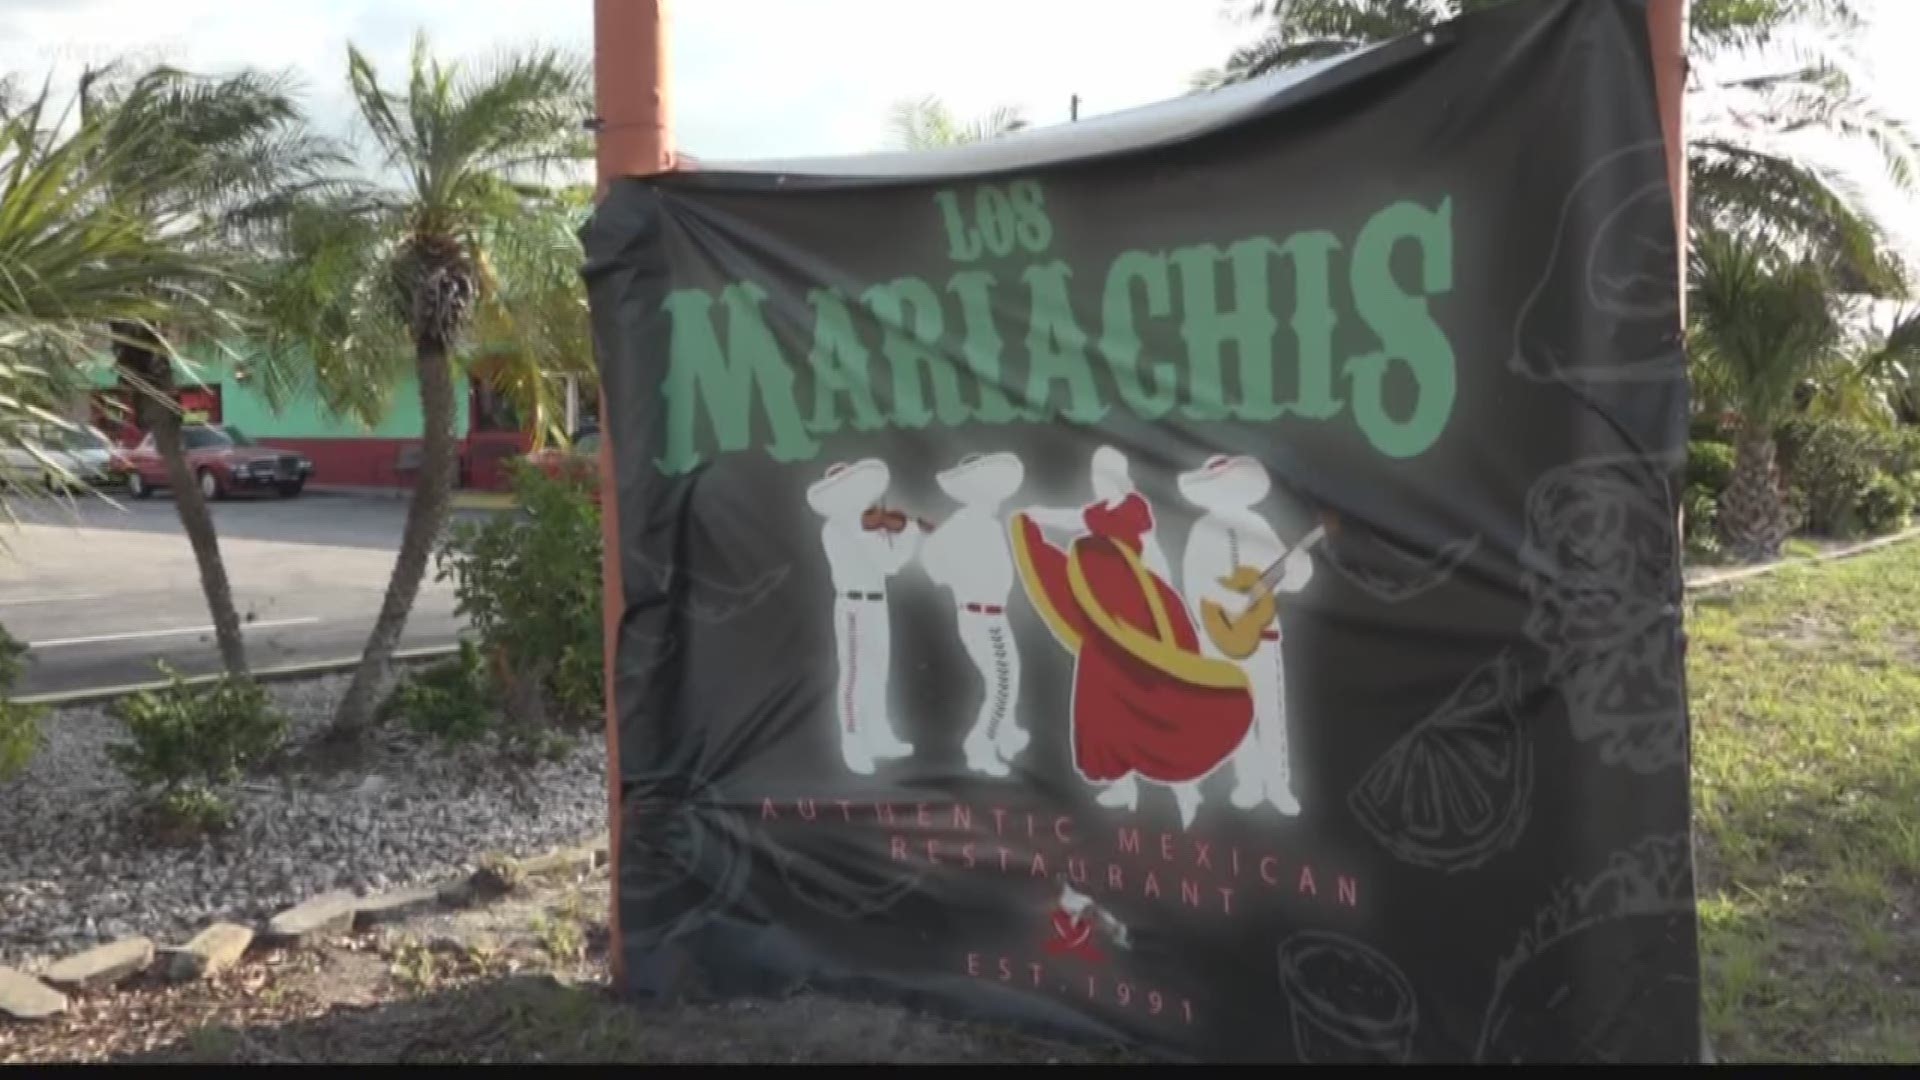 Los Mariachis was temporarily shut down by health inspectors after racking up 32 violations on their April 23 inspection.

According to the report, the inspector found live roaches inside the oven next to the flat top grill, even in the soap dispenser used by employees to wash their hands. The inspector also wrote up 13 rodent droppings in the dry storage area and under a slicer.